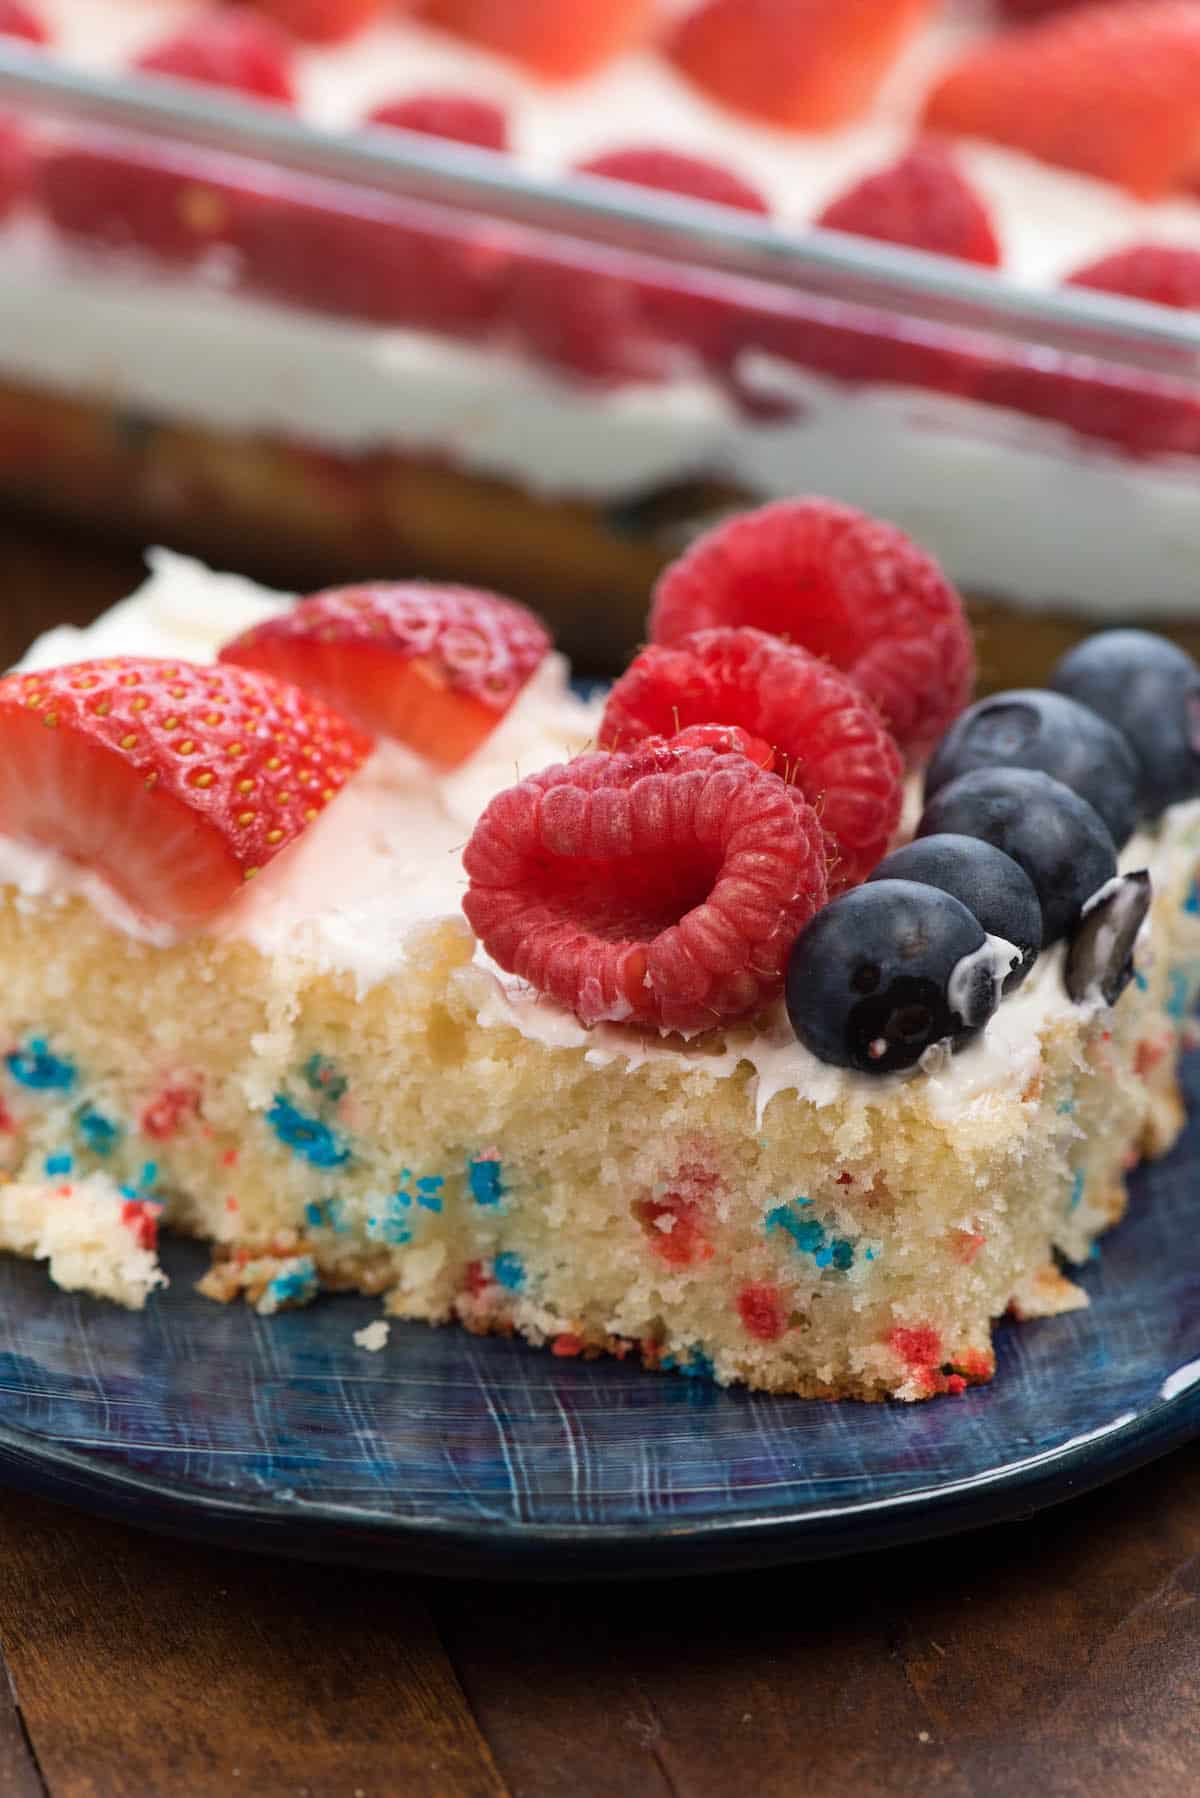 flag cake with blueberries and strawberries on top forming the American flag.